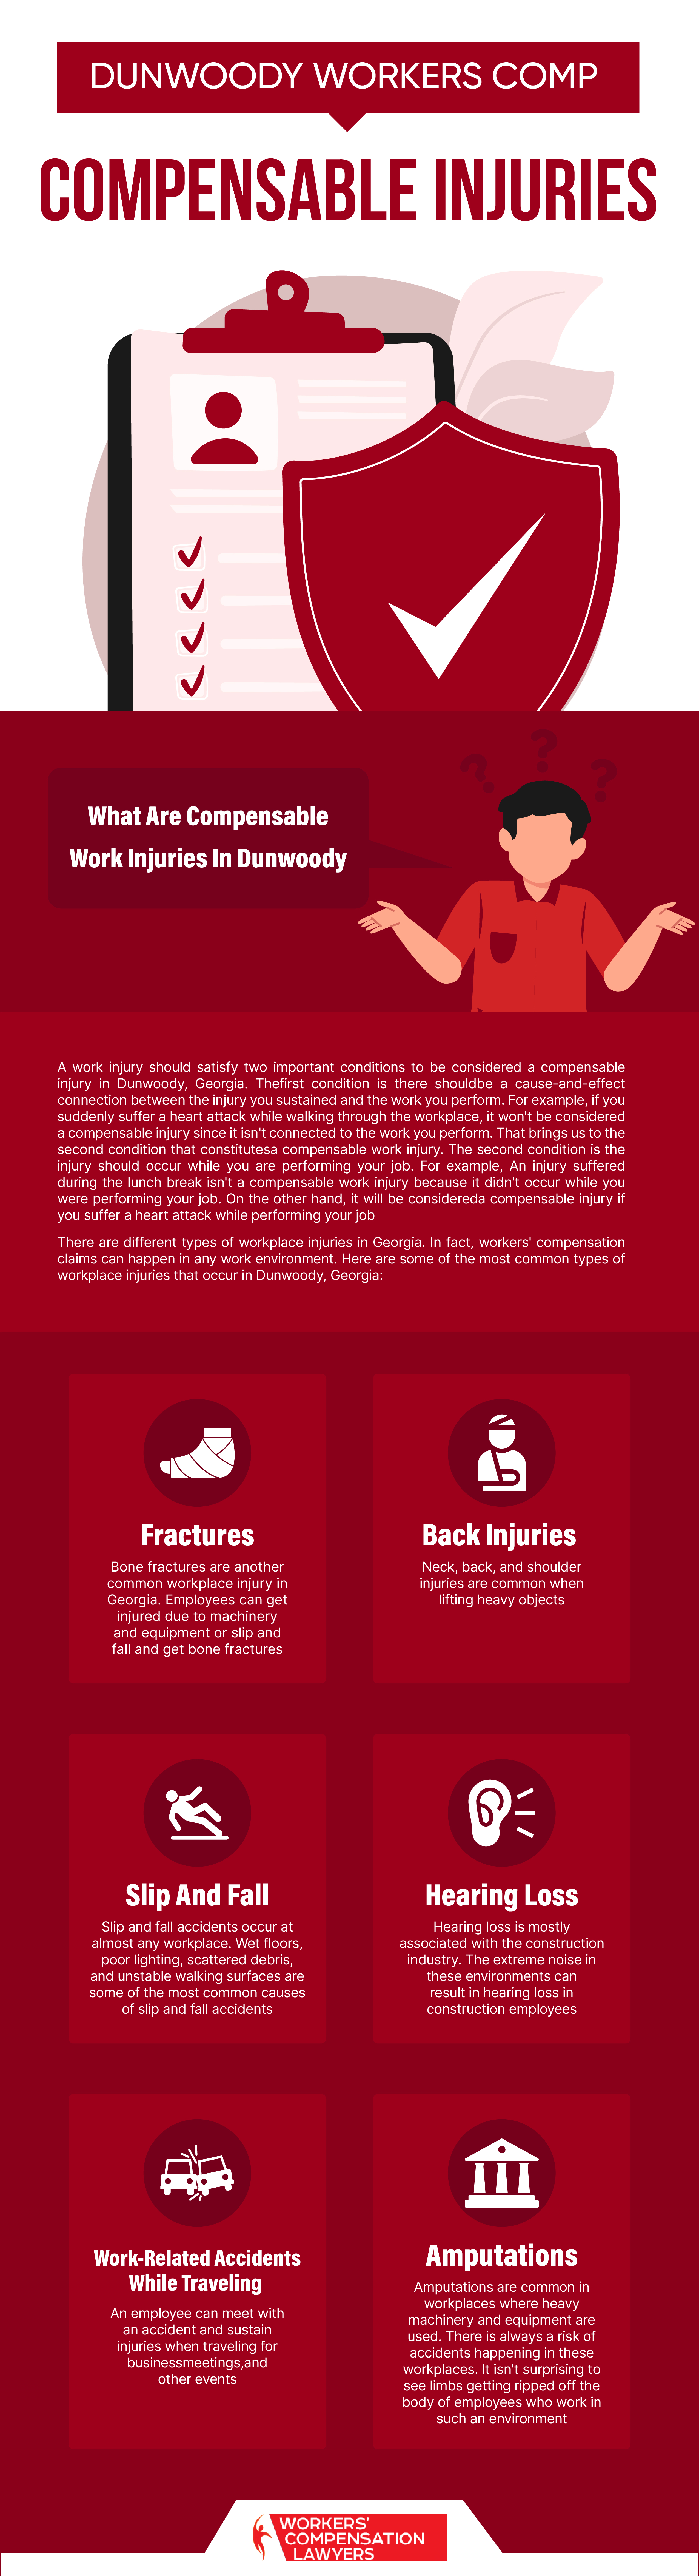 Dunwoody Workers Compensation Compensable Injury Infographic